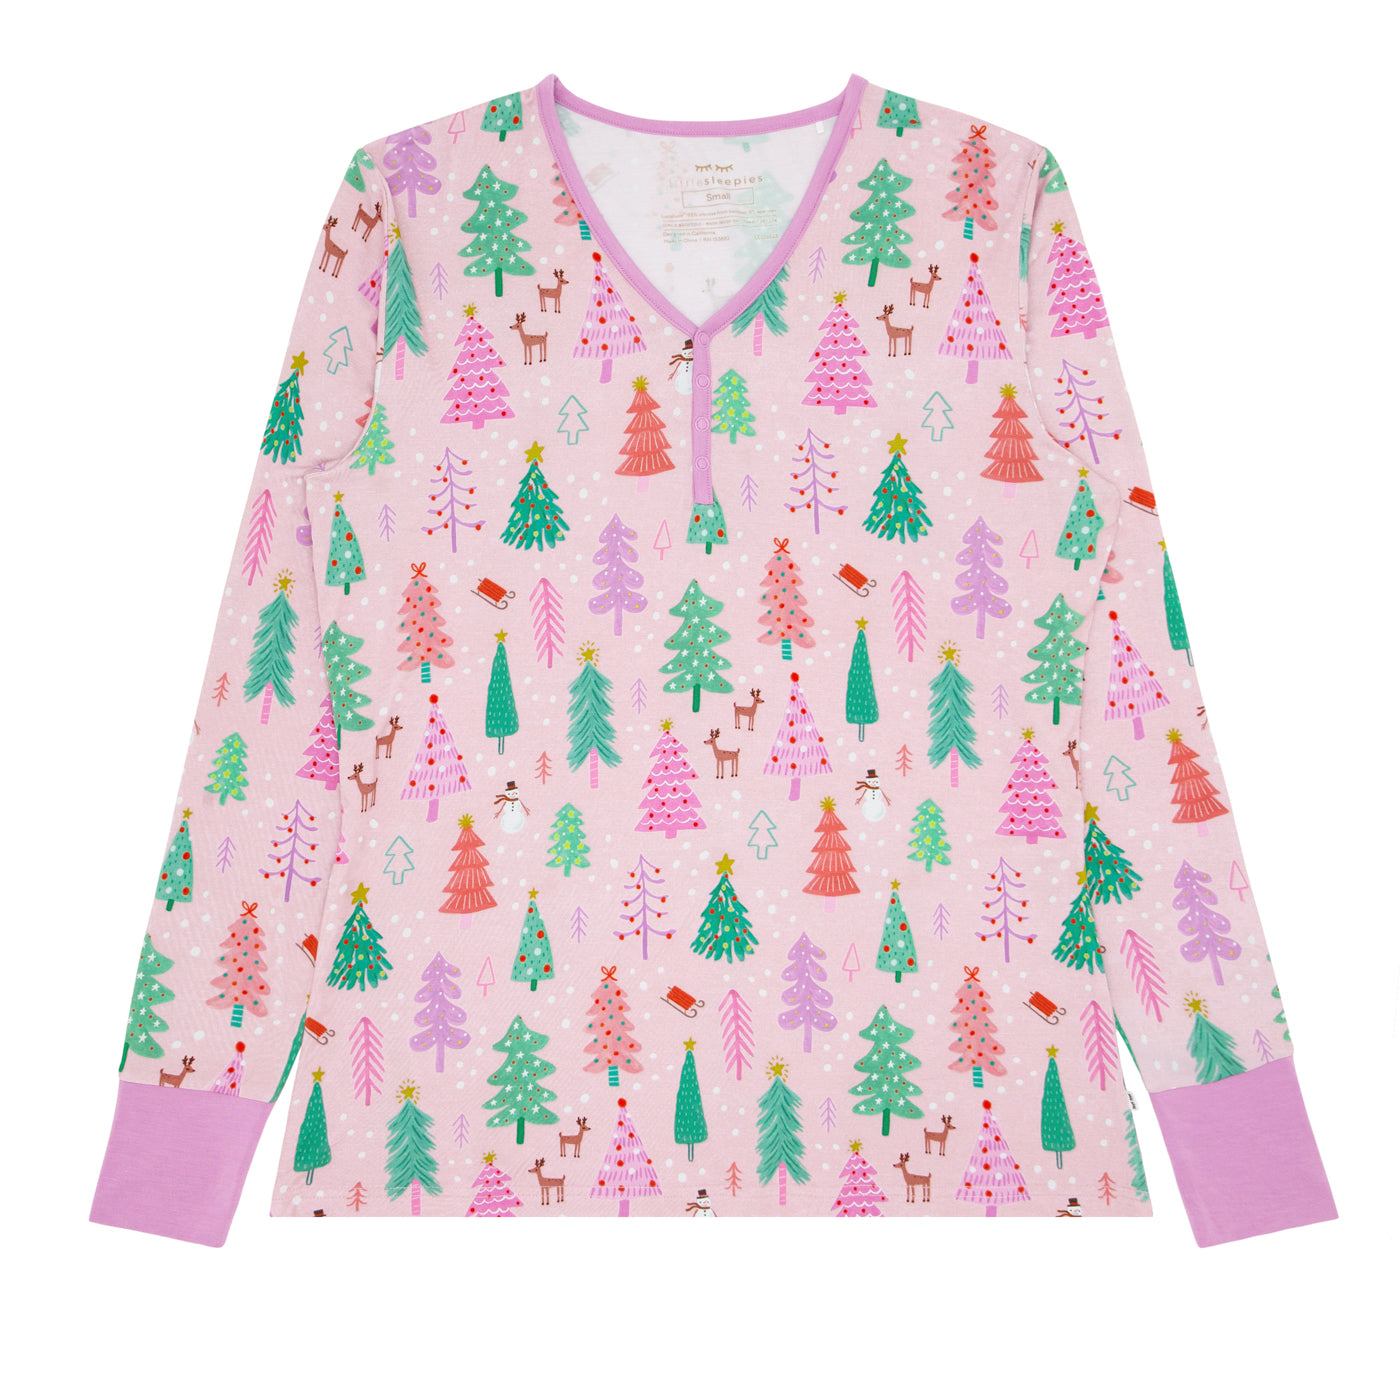 Flat lay image of a Pink Merry and Bright women's pajama top